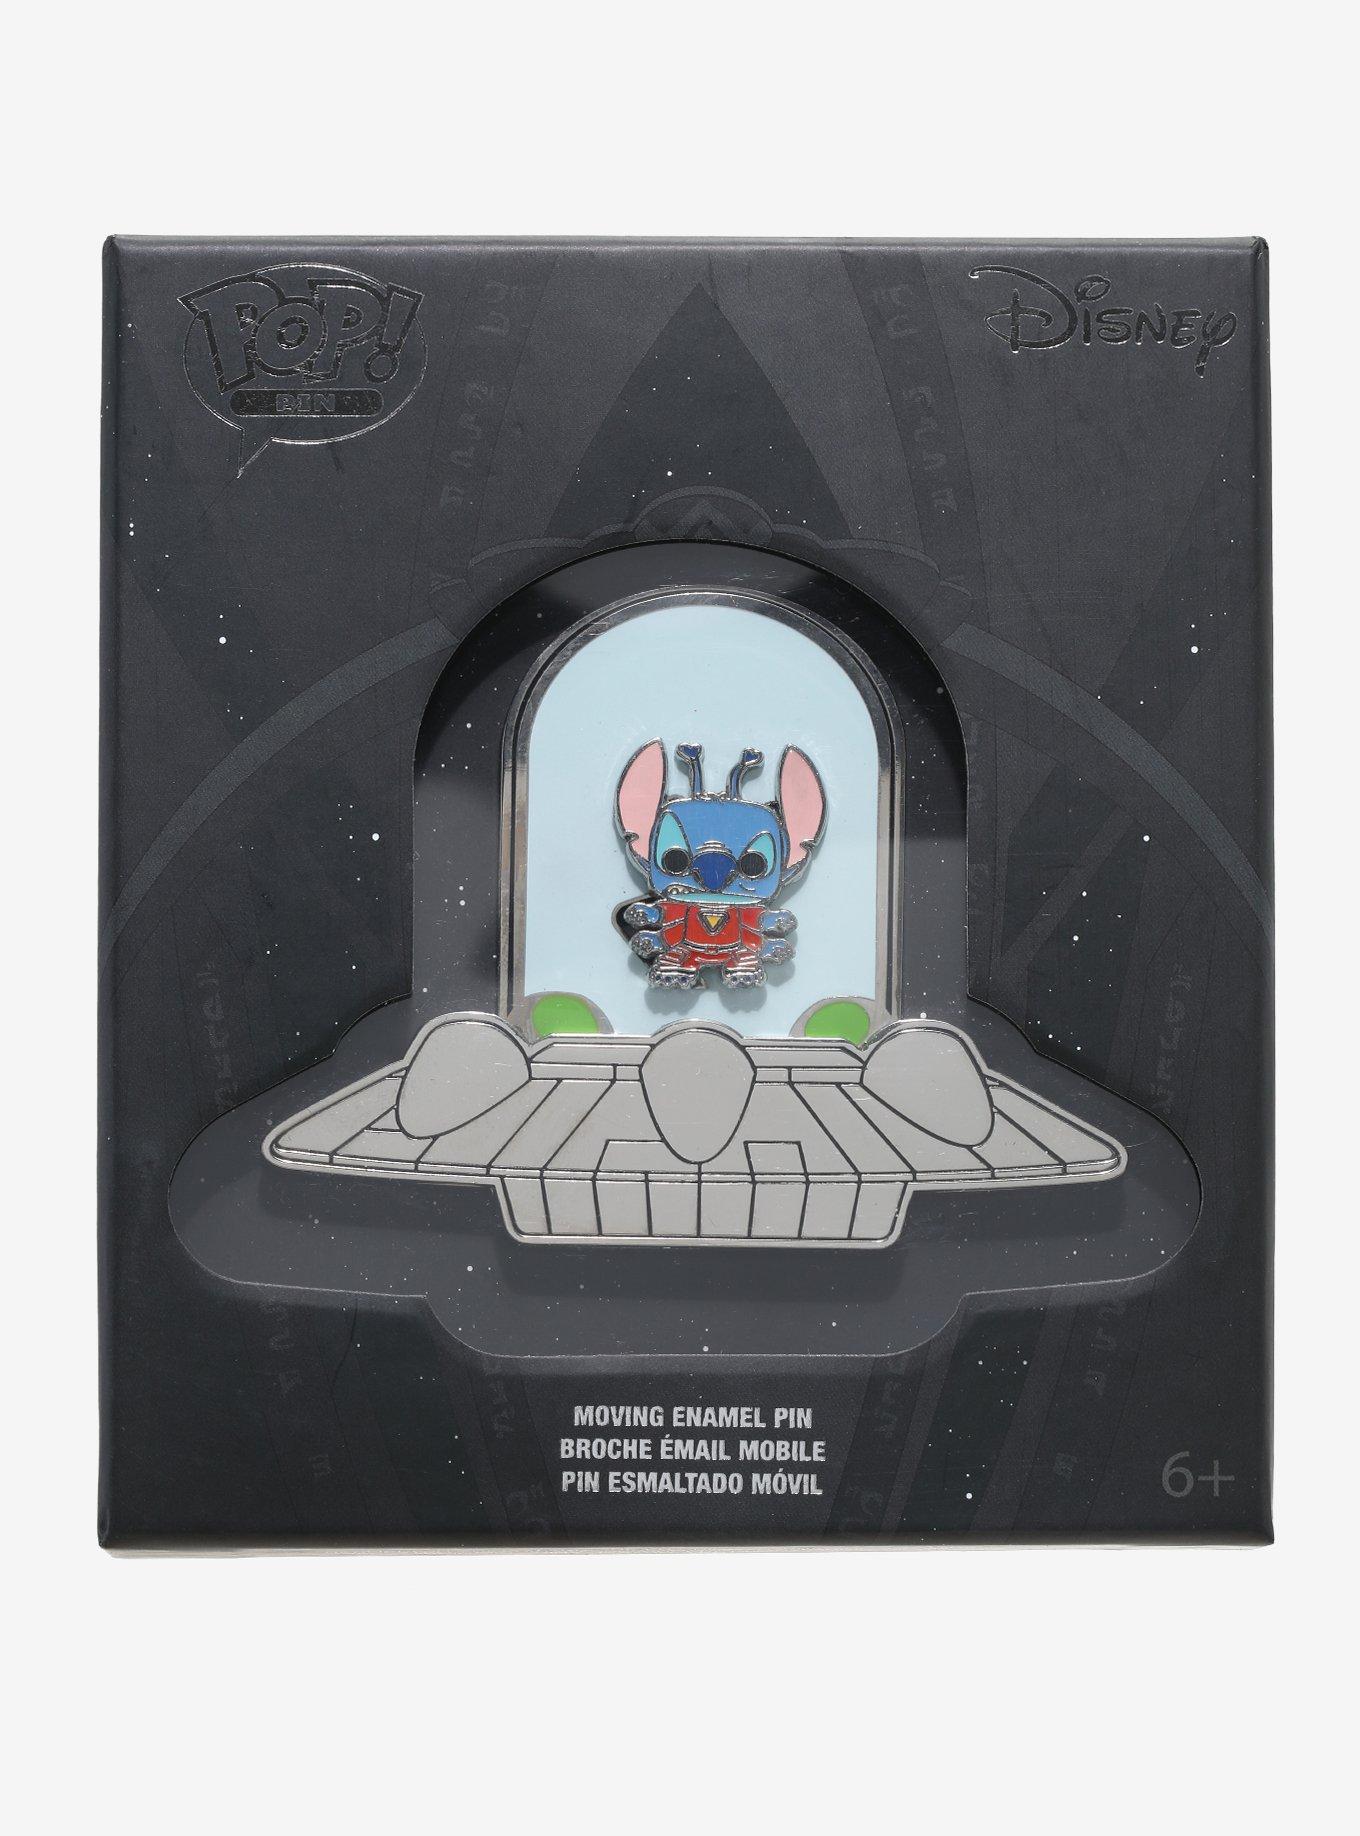 Lilo & Stitch Snacks Spinner Pin at Hot Topic - Disney Pins Blog